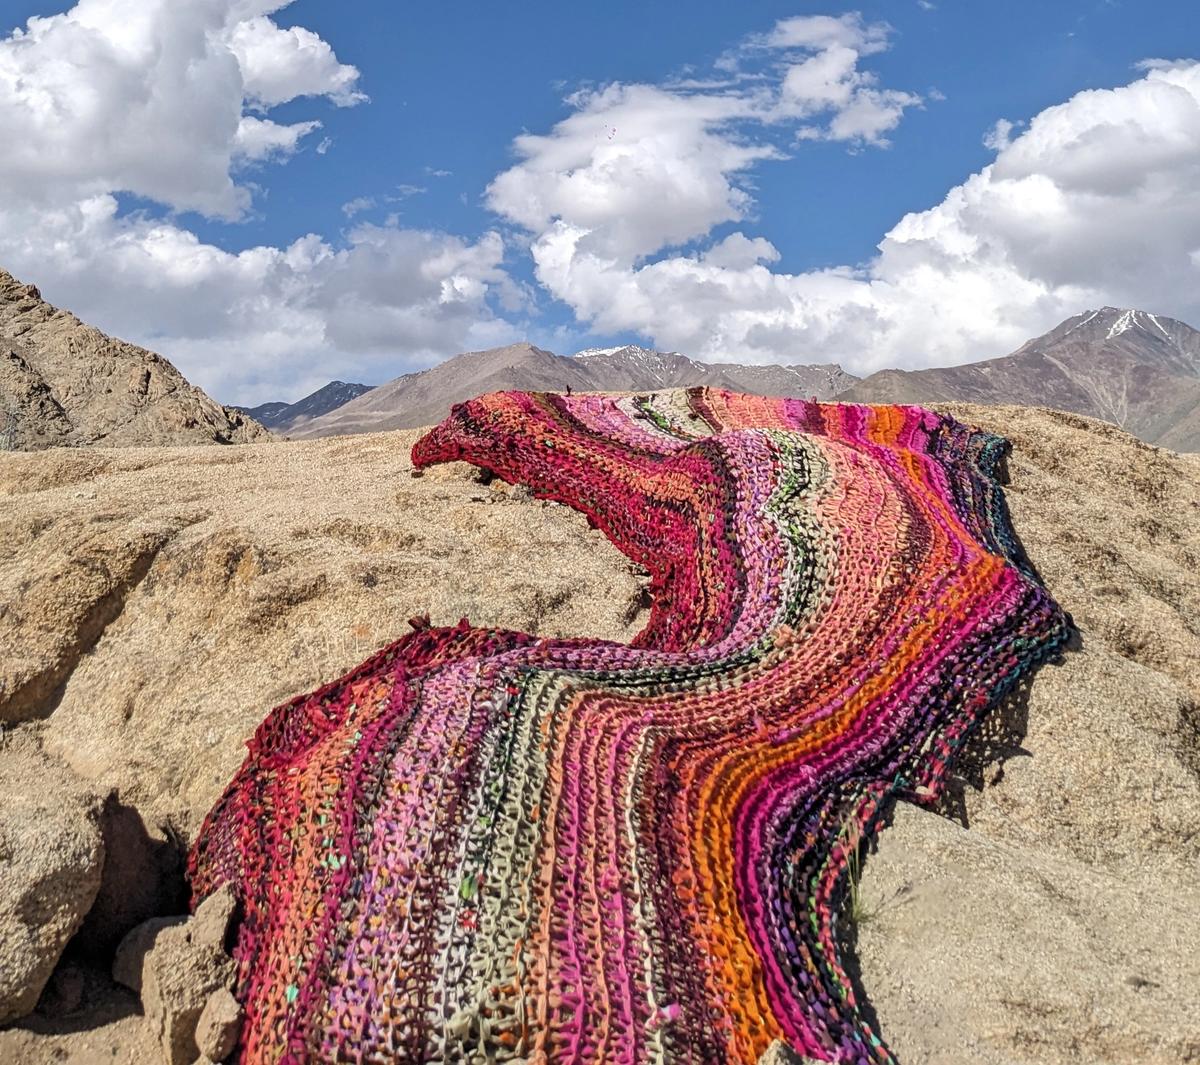 South Asia's highest exhibition of land art debuts at 12,000 ft in